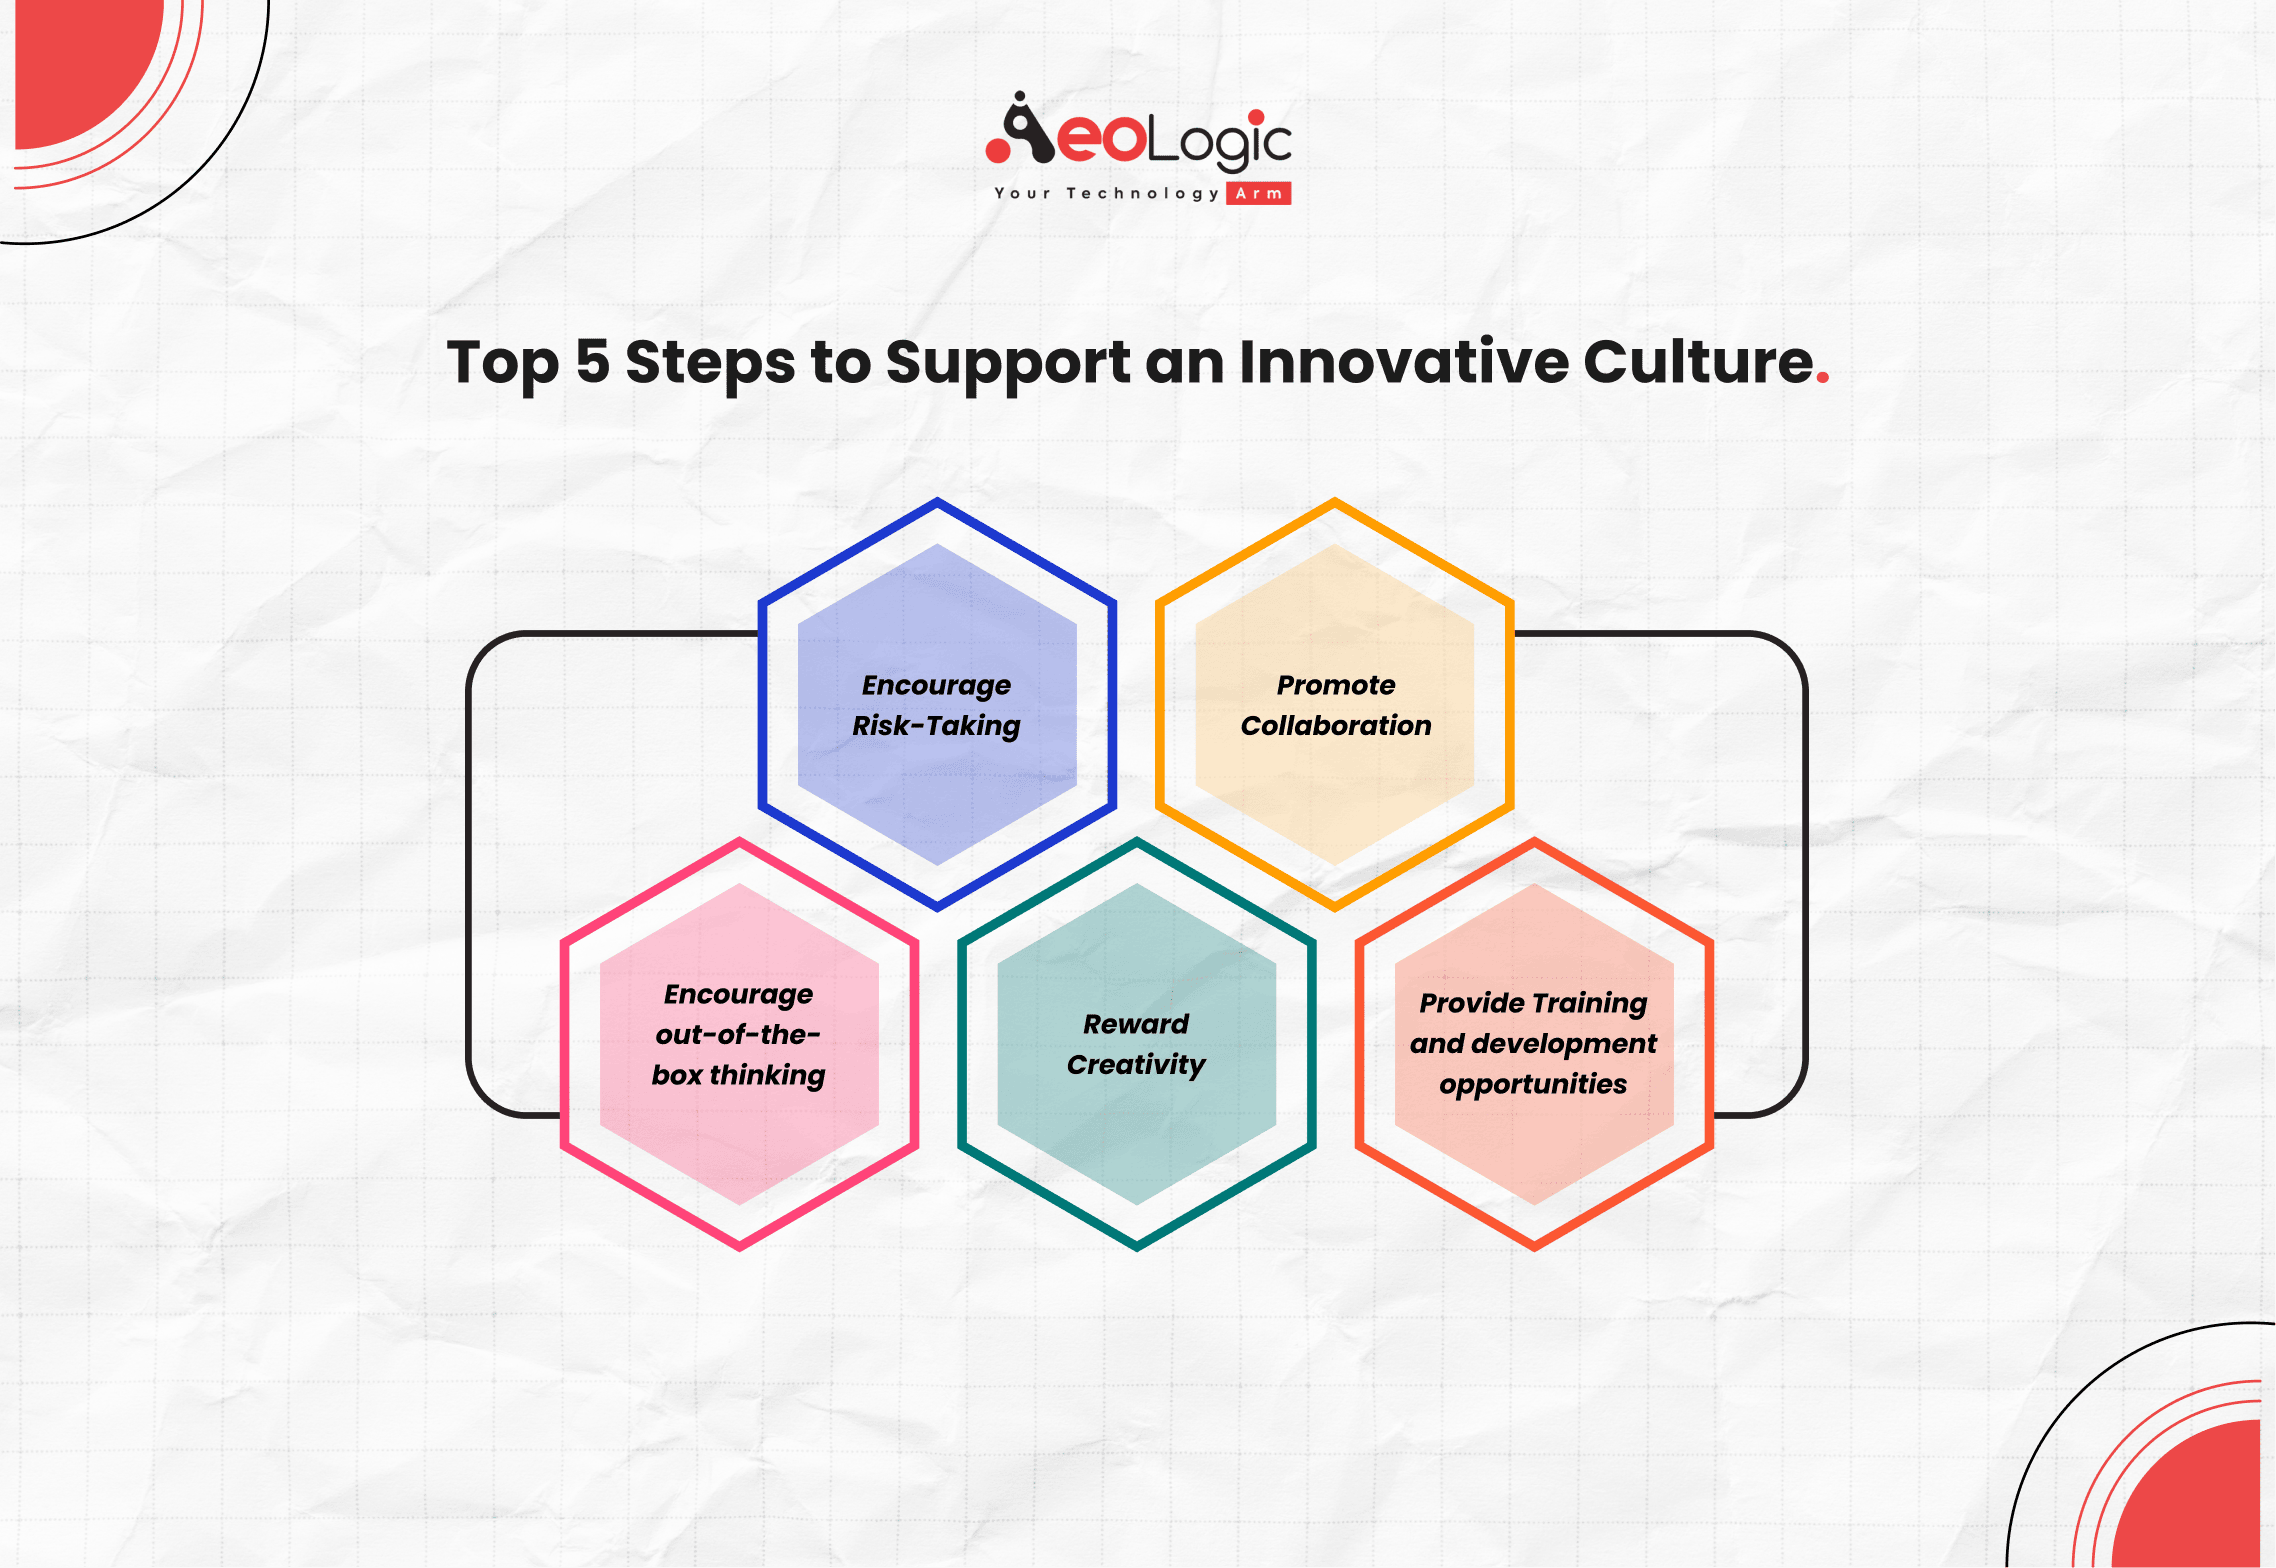 Top 5 Steps to Support an Innovative Culture